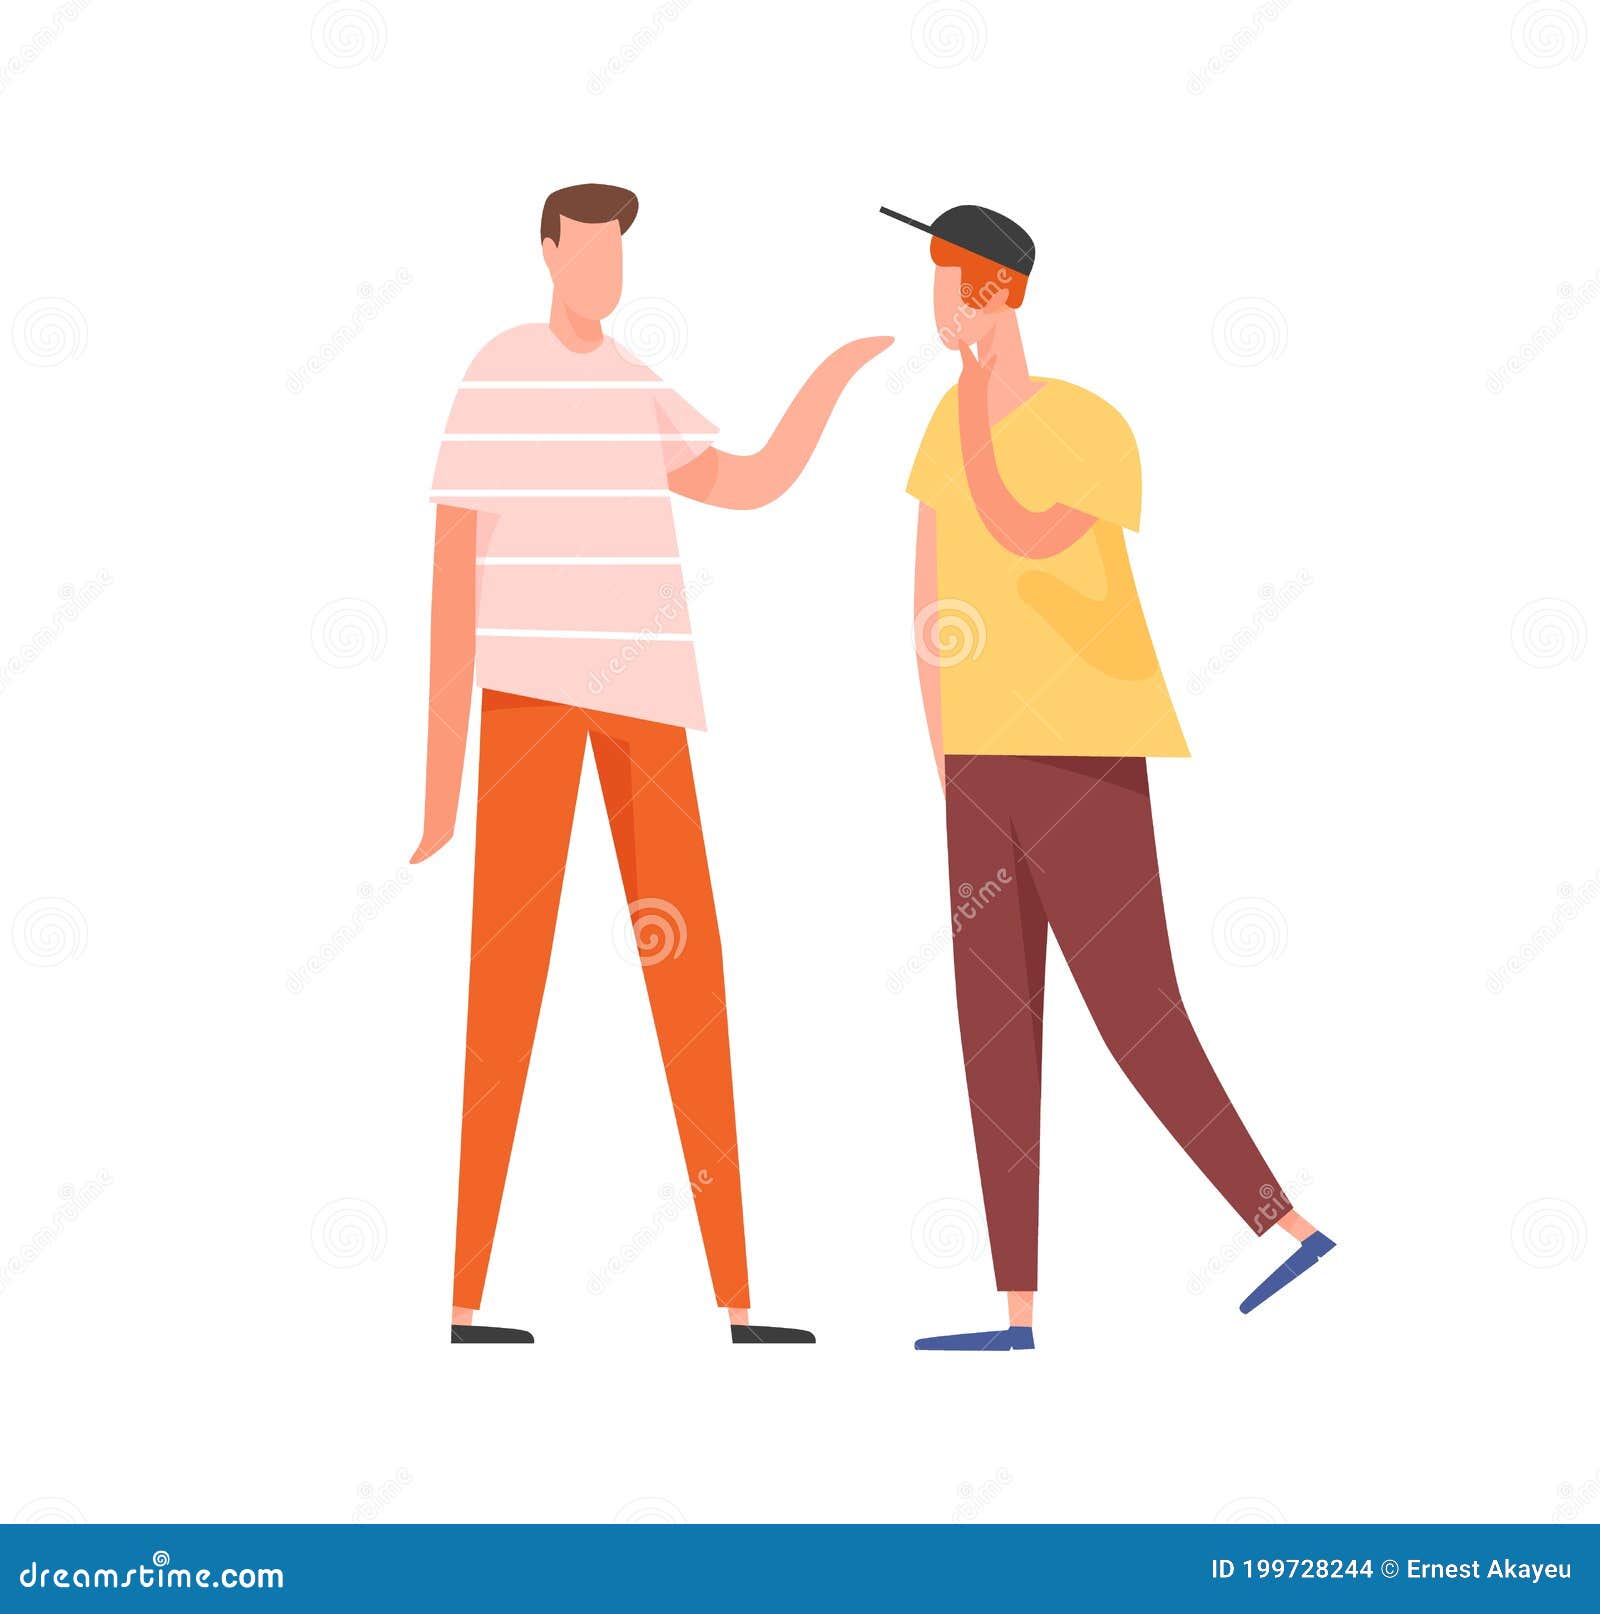 Two People Talking Cartoon Stock Illustrations 2 987 Two People Talking Cartoon Stock Illustrations Vectors Clipart Dreamstime